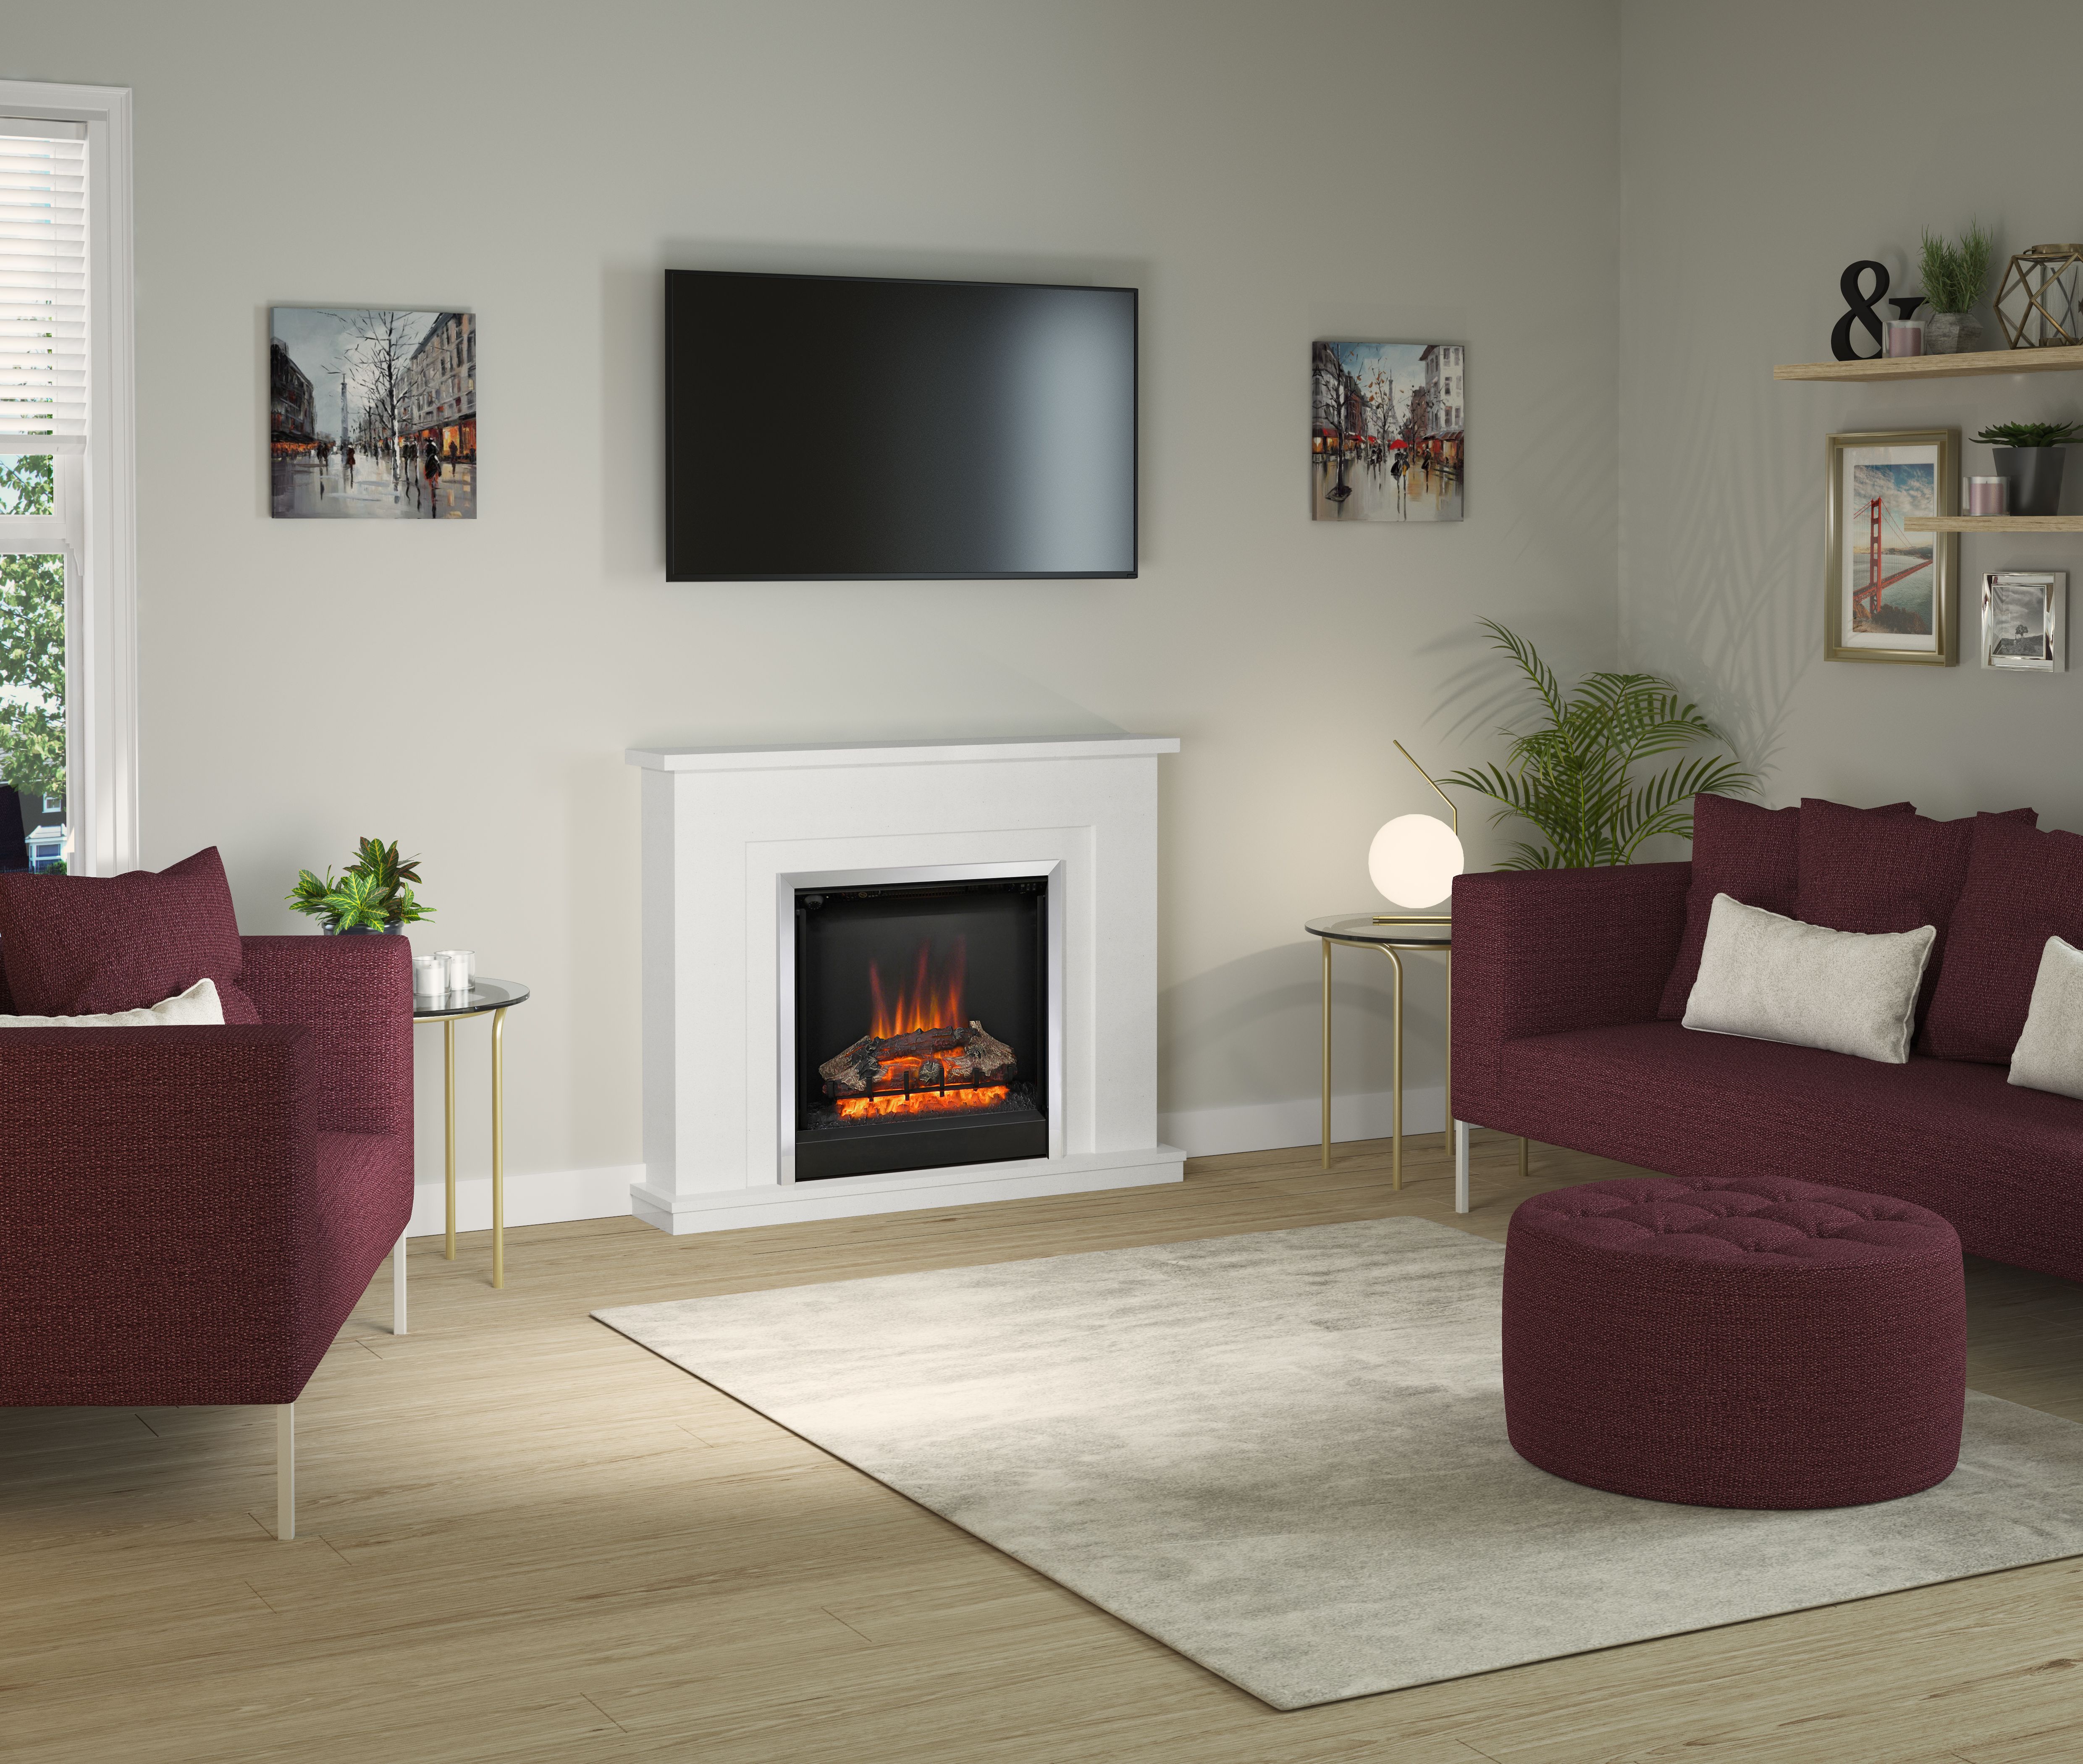 Be Modern Evelina Black & white Chrome effect Inset Electric Fire suite